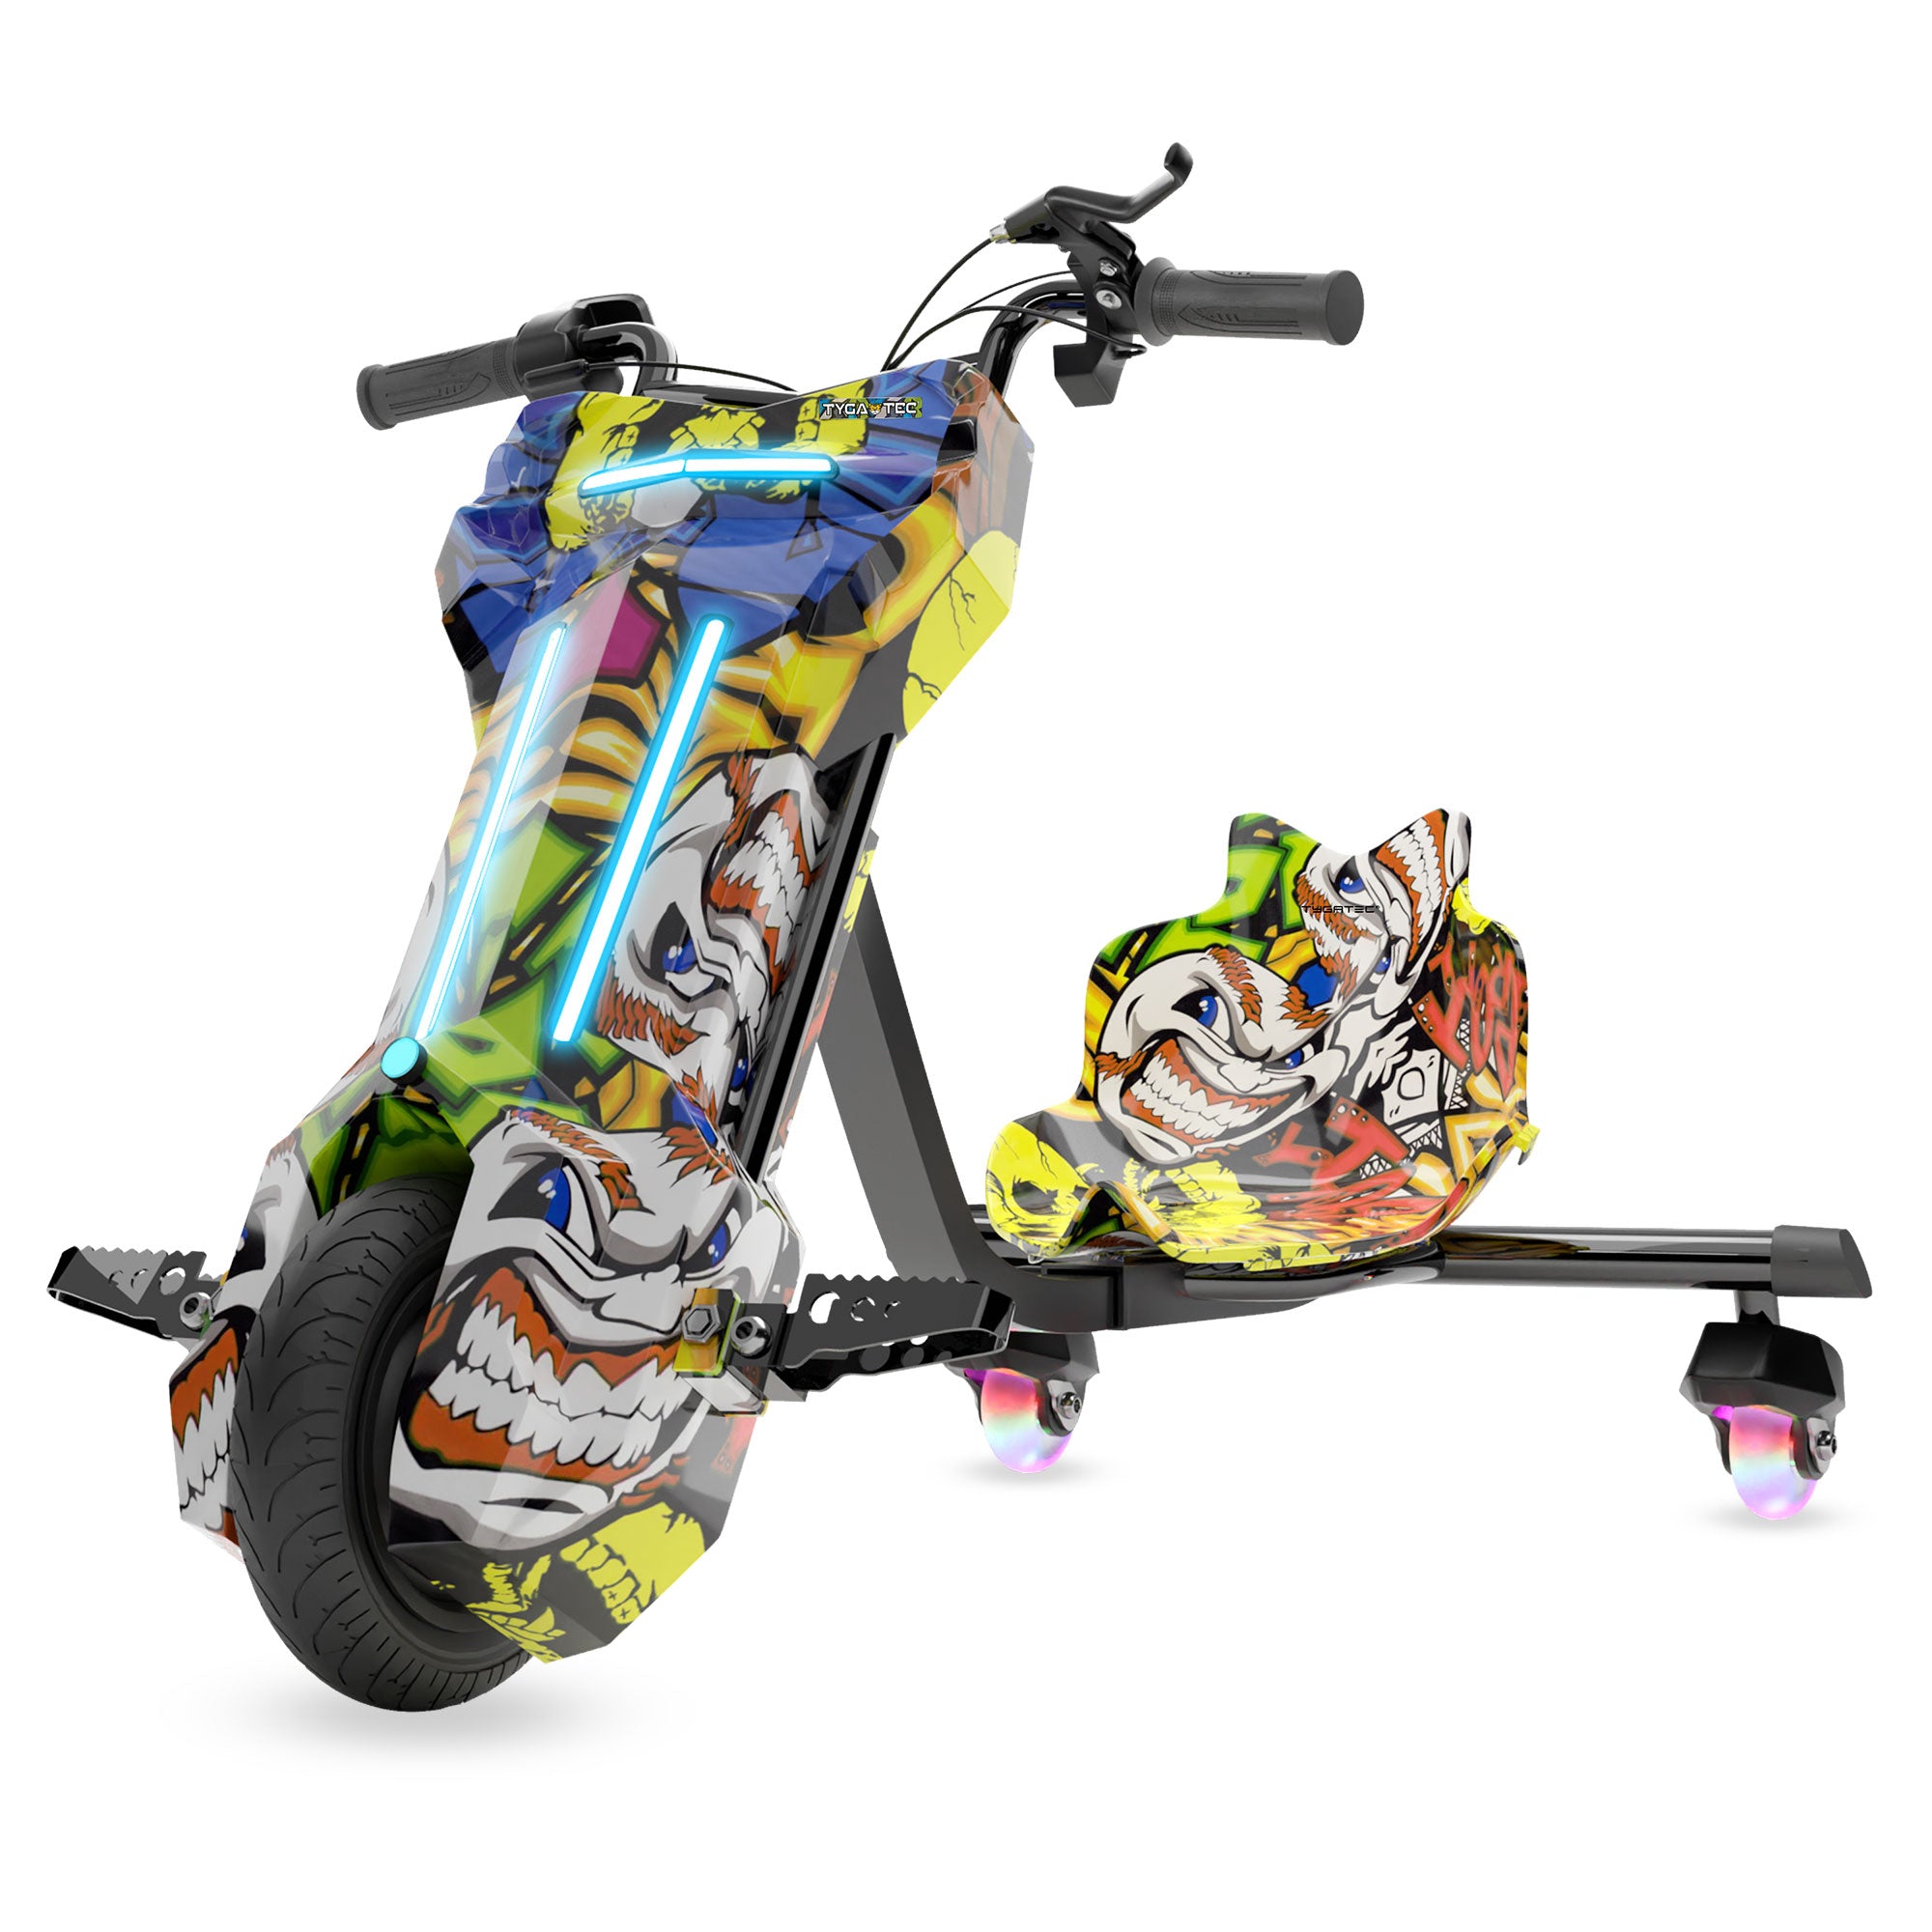 TYGATEC T9 3 WHEEL ELECTRIC 360 DRIFTER FOR KIDS AND ADULTS WITH LED LIGHT AND BLUETOOTH (Extreme Ed-hardy color)